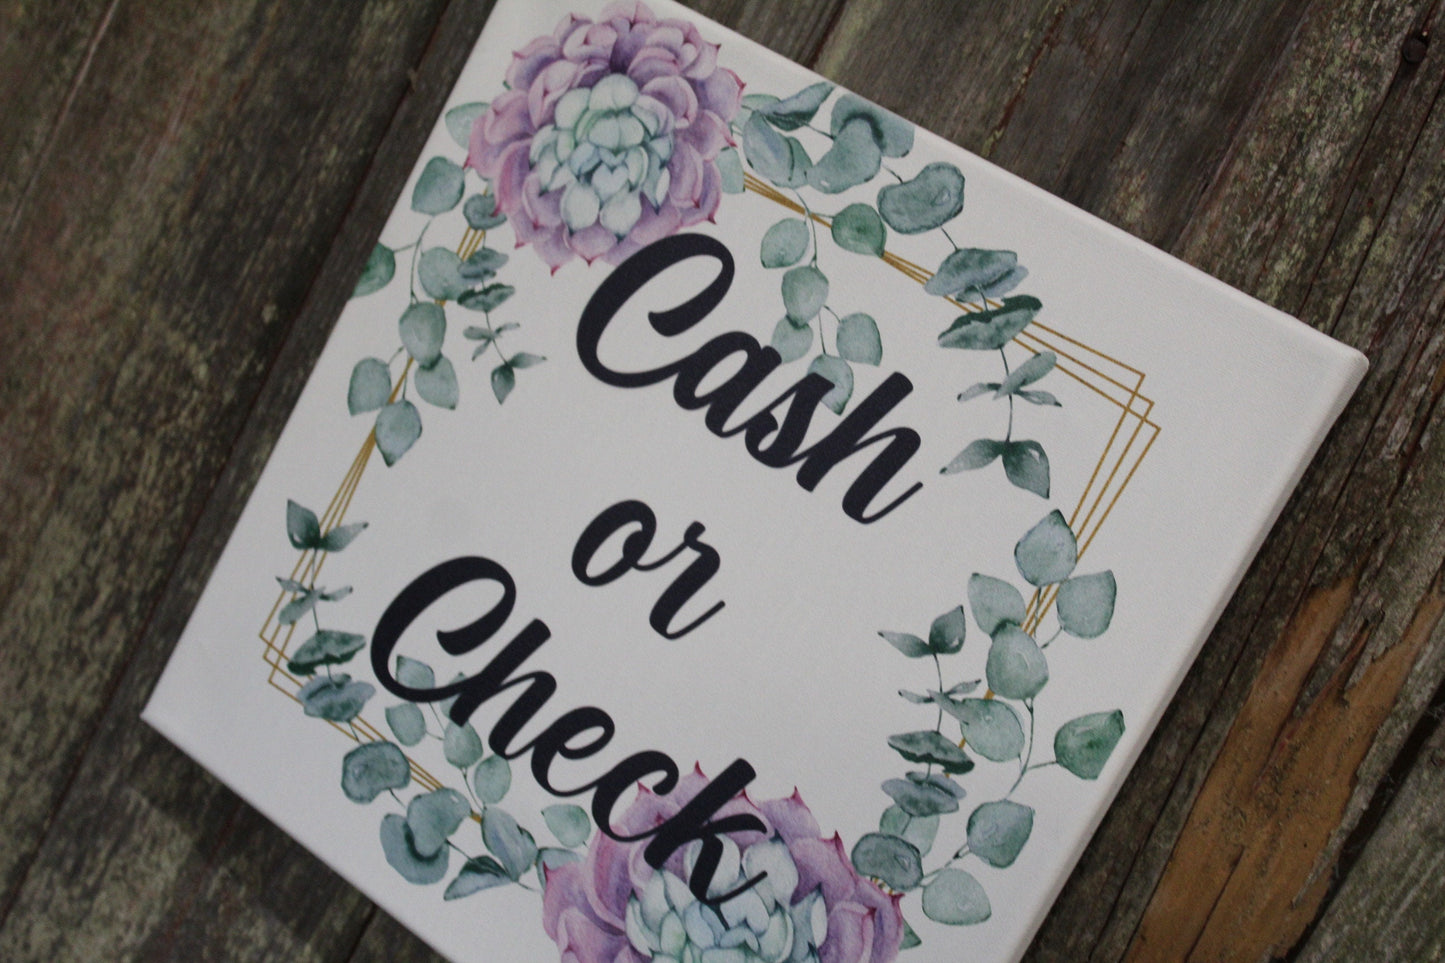 Vendor Booth Canvas Cash or Check Succulent Plants Organic Canvas Printed Sign For Small Business Craft Fair Market Signage Announcement